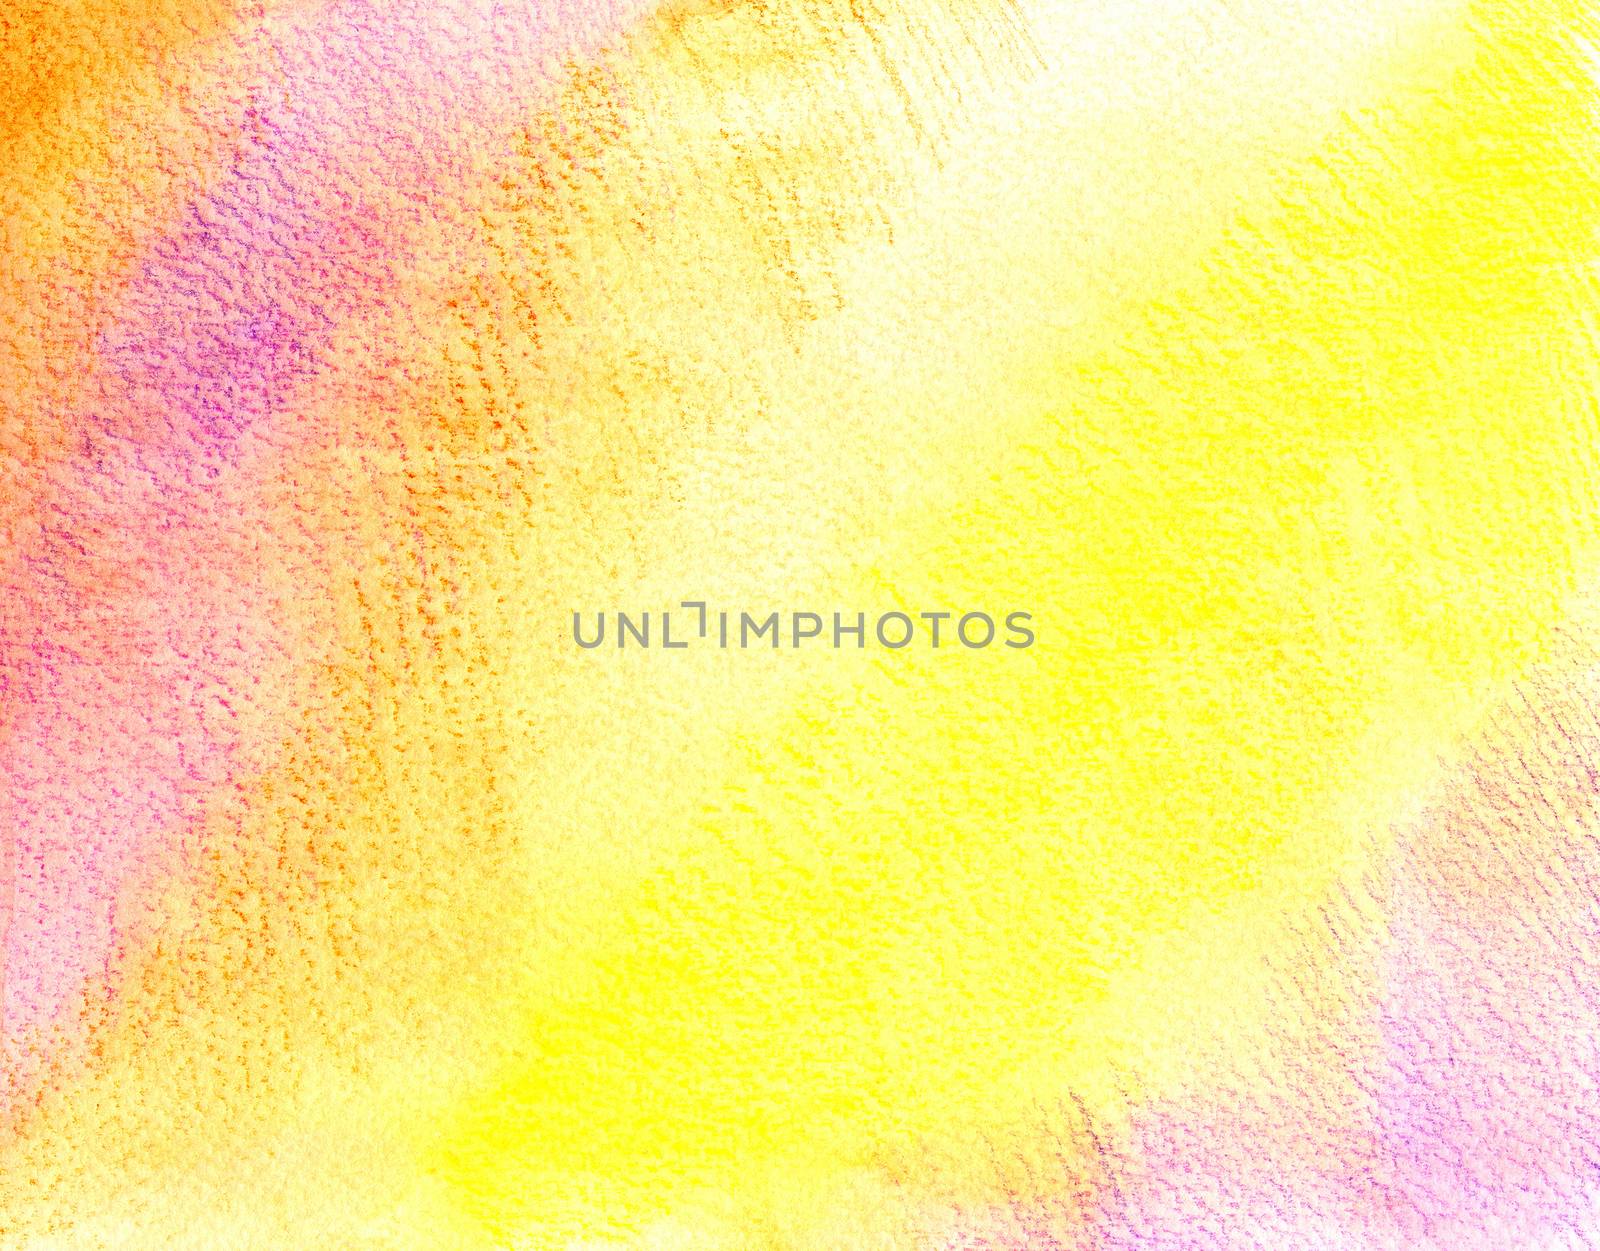 Hand-drawn yellow, red, purple color background. Texture paper painted in yellow, orange and purple with a watercolor pencil. Background for cards, collages, designs, titles, price tags, flyers and so on.